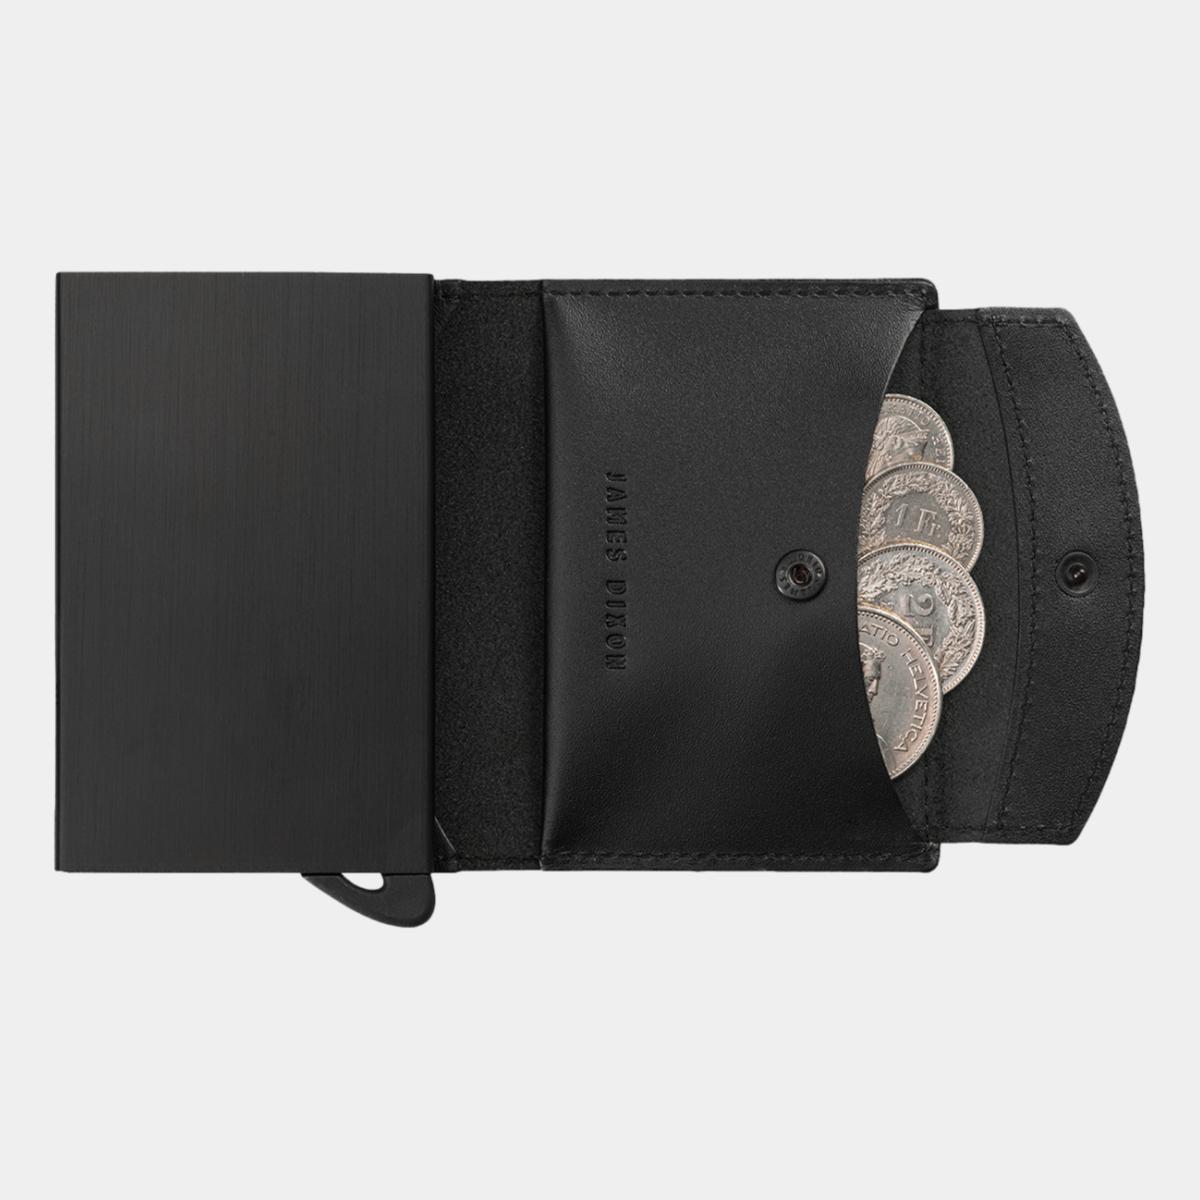 jd0121 james dixon puro one all black coin pocket wallet coins